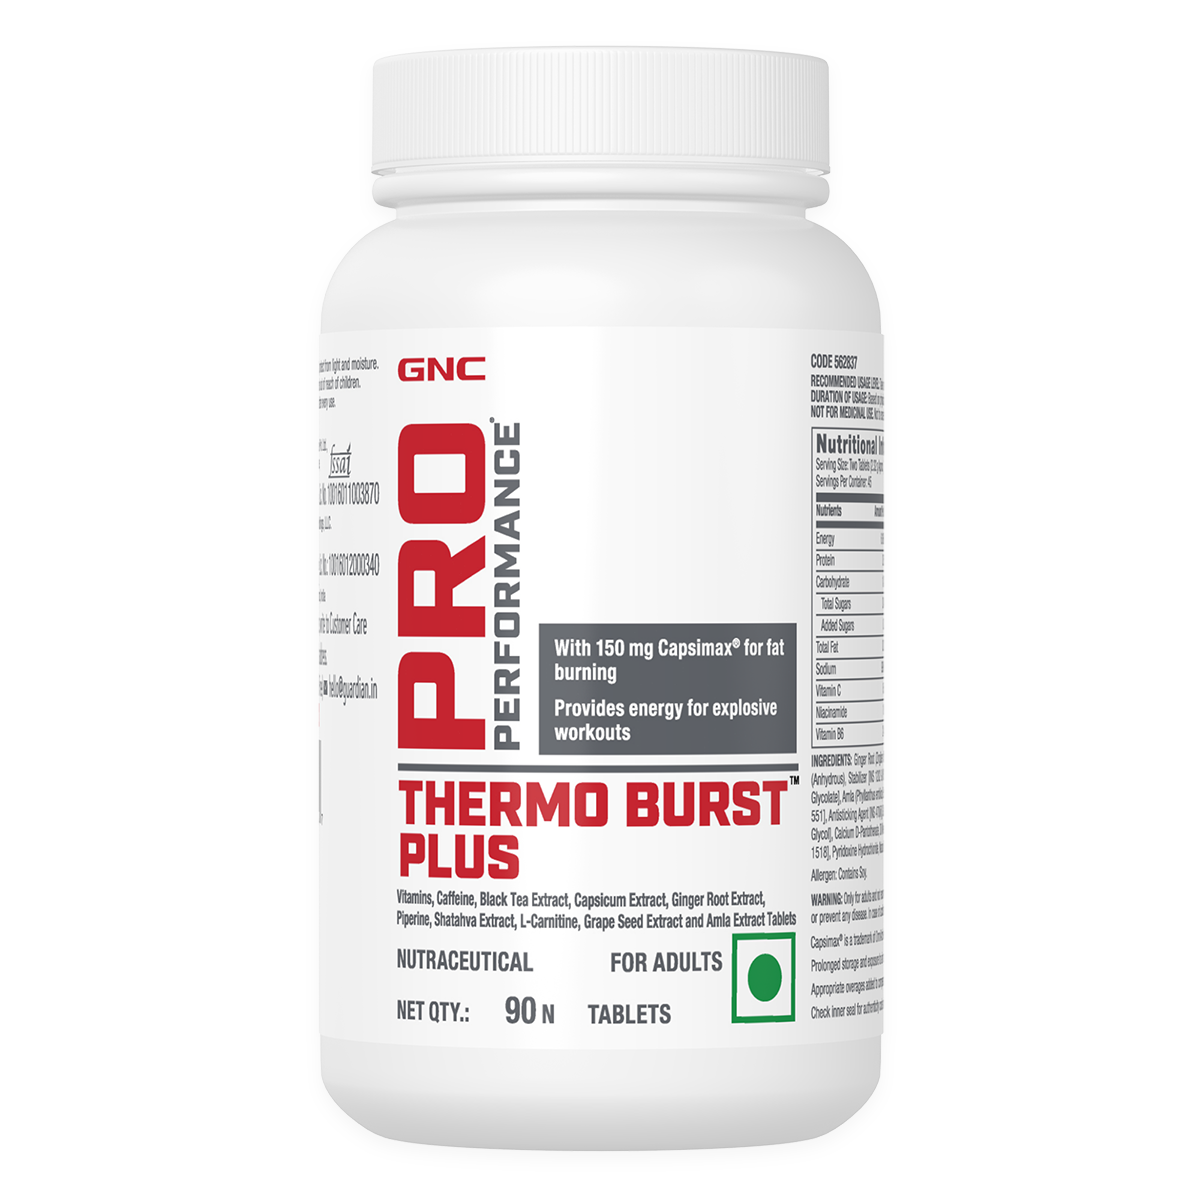 GNC Pro Performance Thermo Burst Plus | Advanced Thermogenic Fat Burner For Super-Explosive Workouts